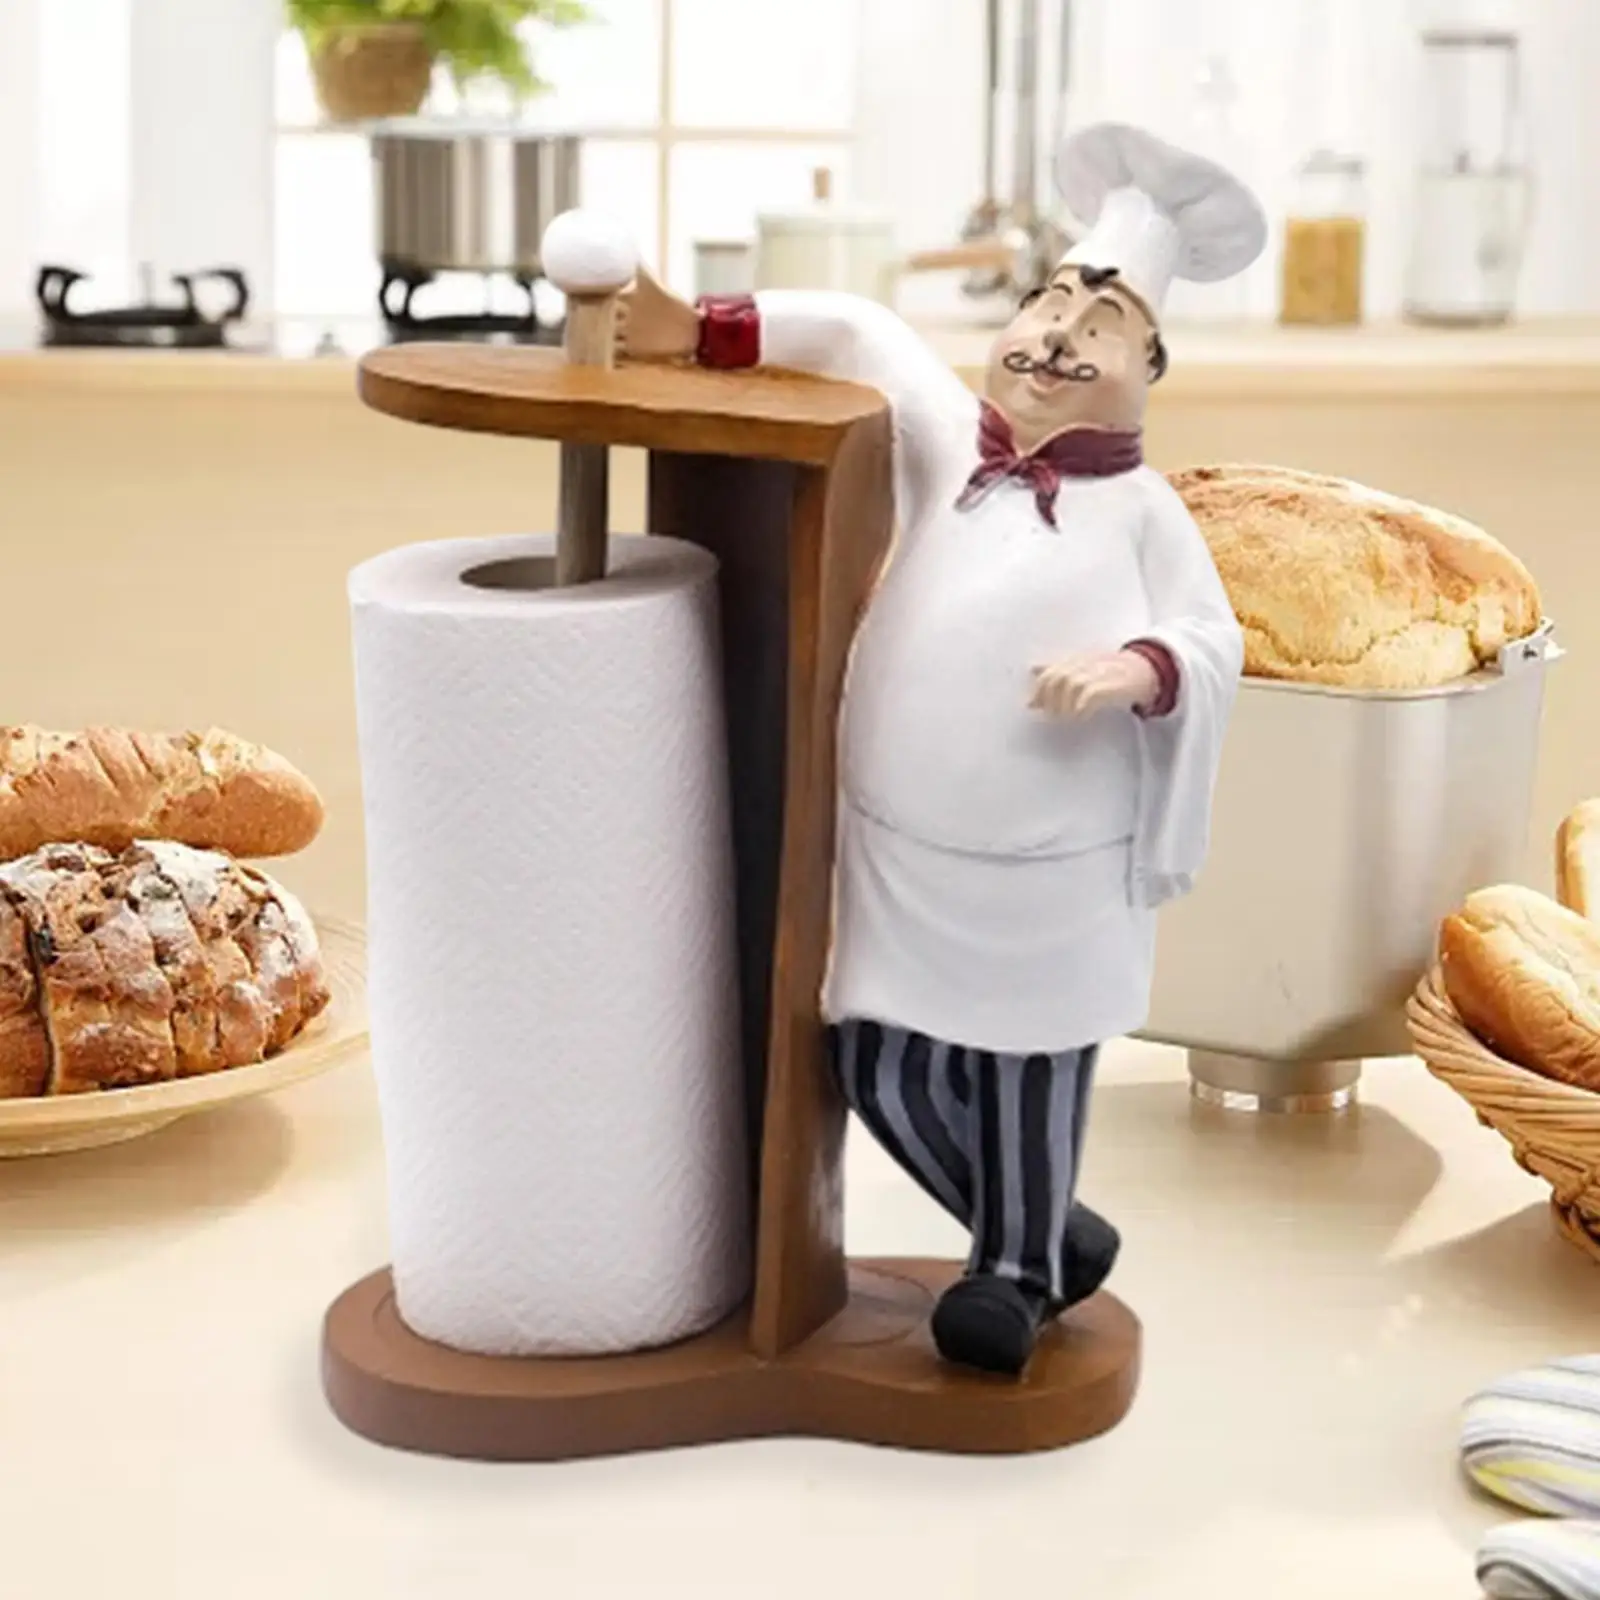 Baker or Chef Toilet Paper Roll Craft